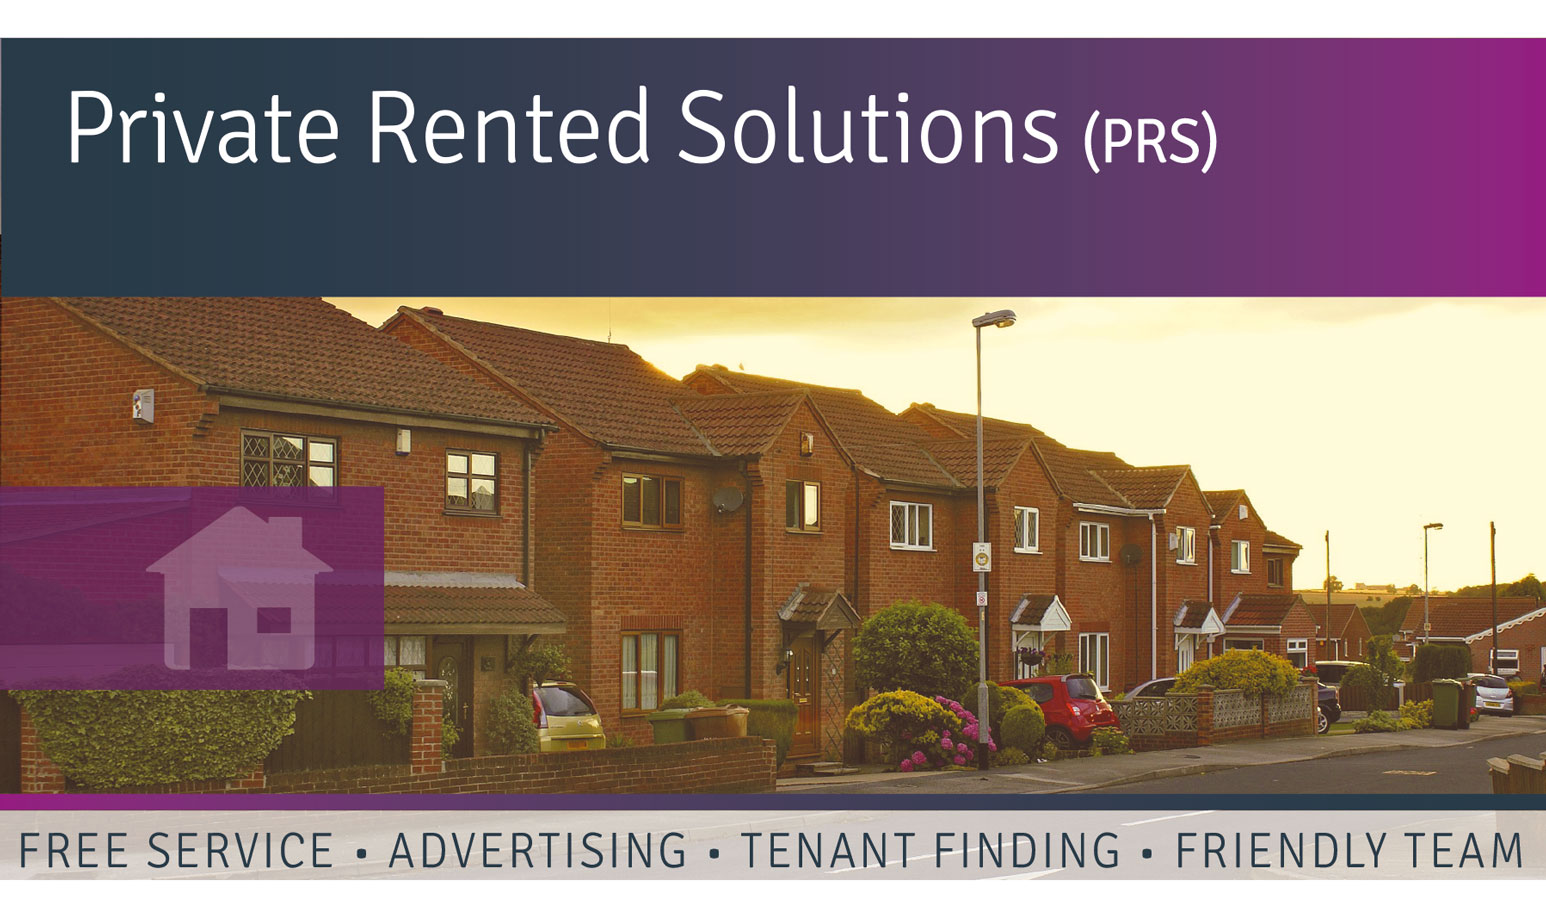 Private Rented Solutions (PRS) - title. Image of houses with street light in middle. Underneath image reads: "FREE SERVICE • ADVERTISING • TENANT FINDING • FRIENDLY TEAM"